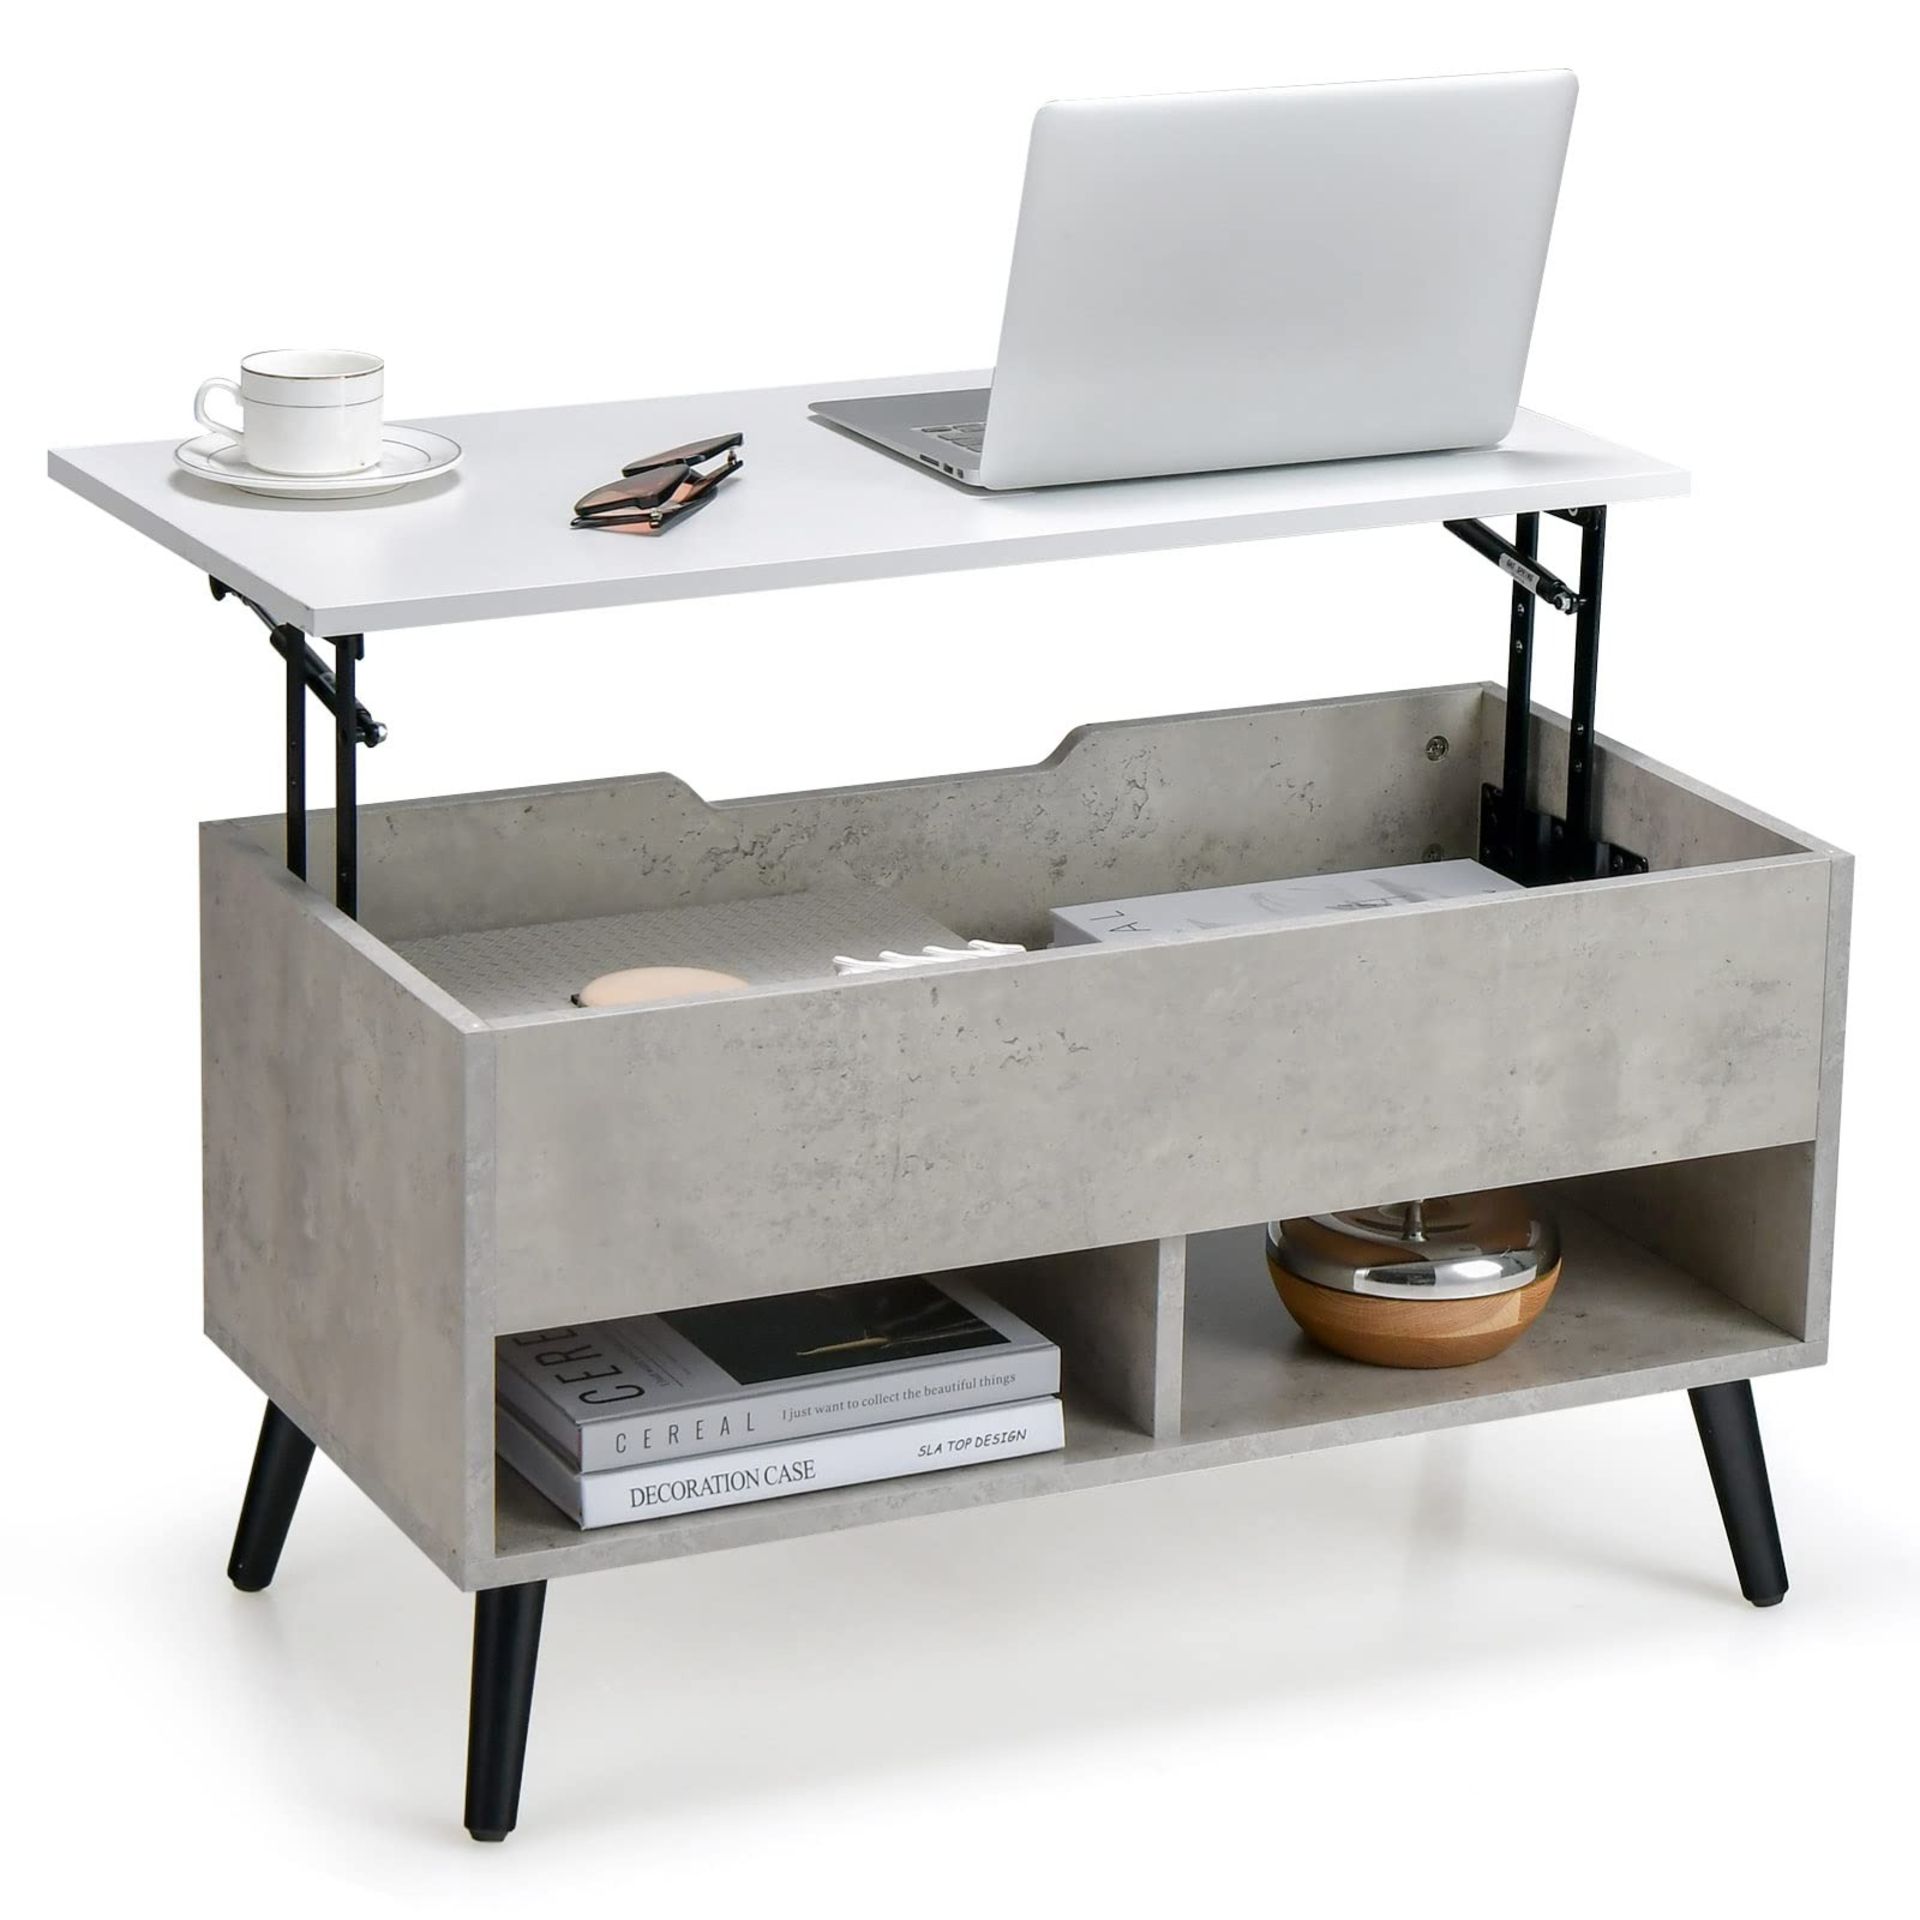 Lift Up Top Coffee Table, Wooden Lifting Cocktail Center Table with Hidden Storage Grey - ER54